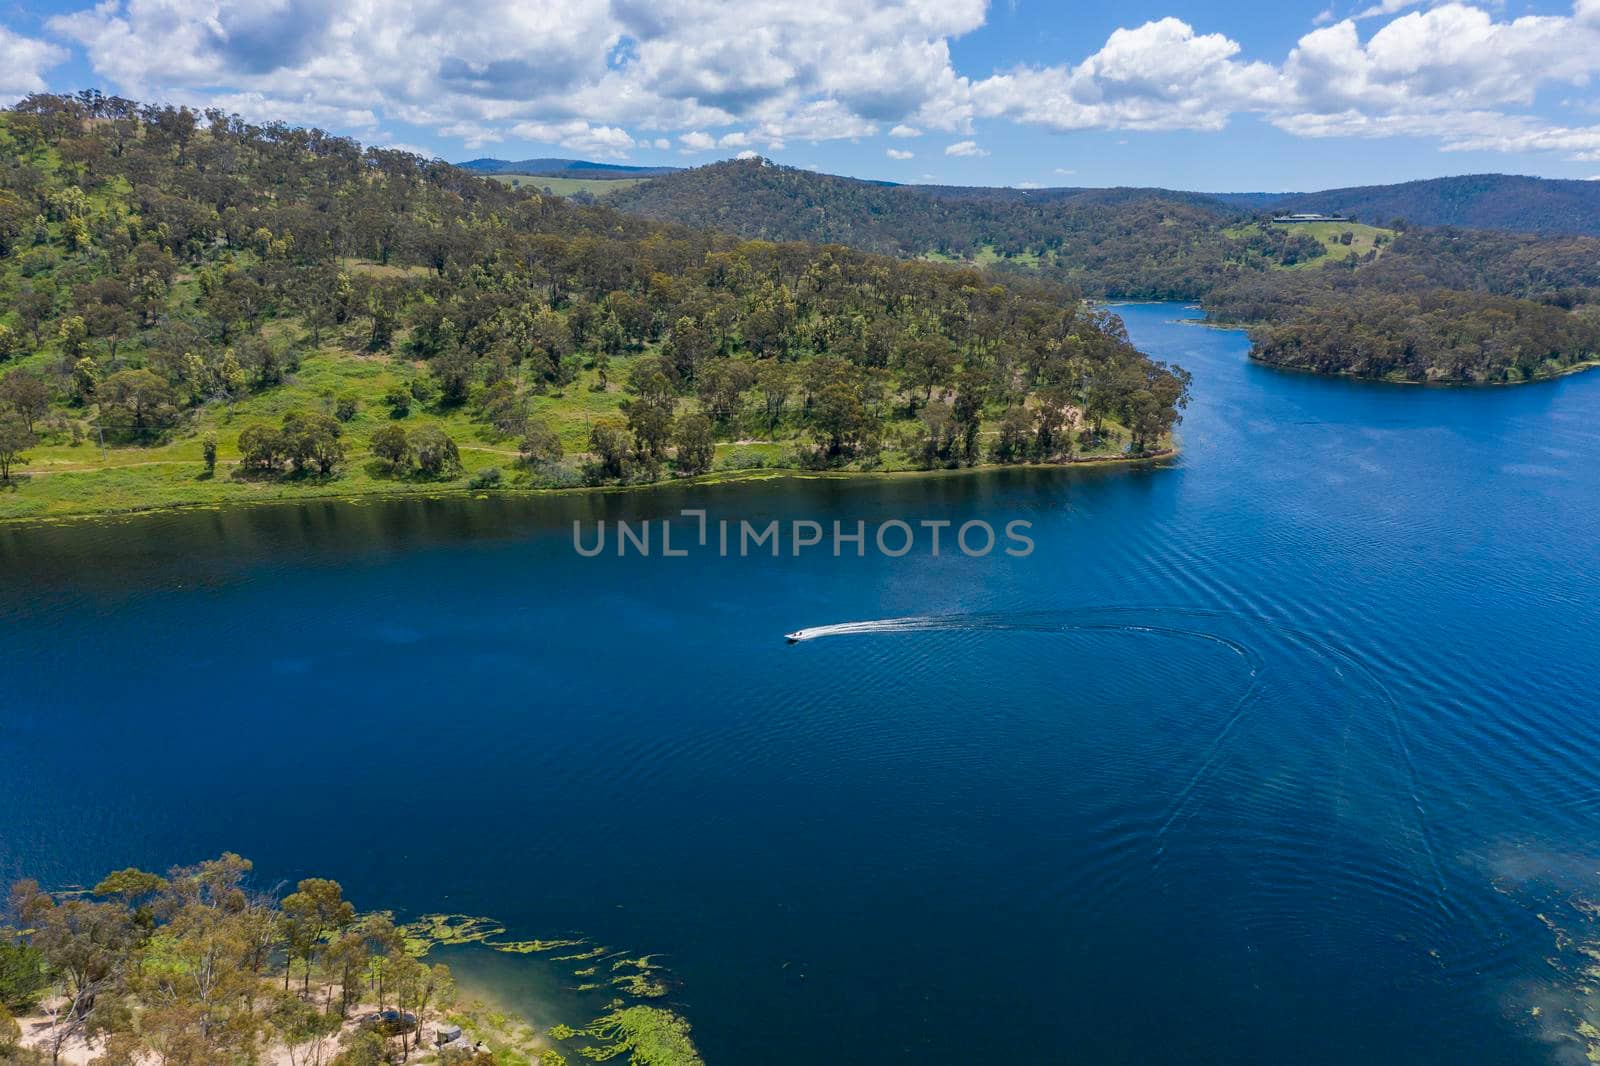 Aerial view of recreational Lake Lyell near Lithgow in regional New New South Wales Australia